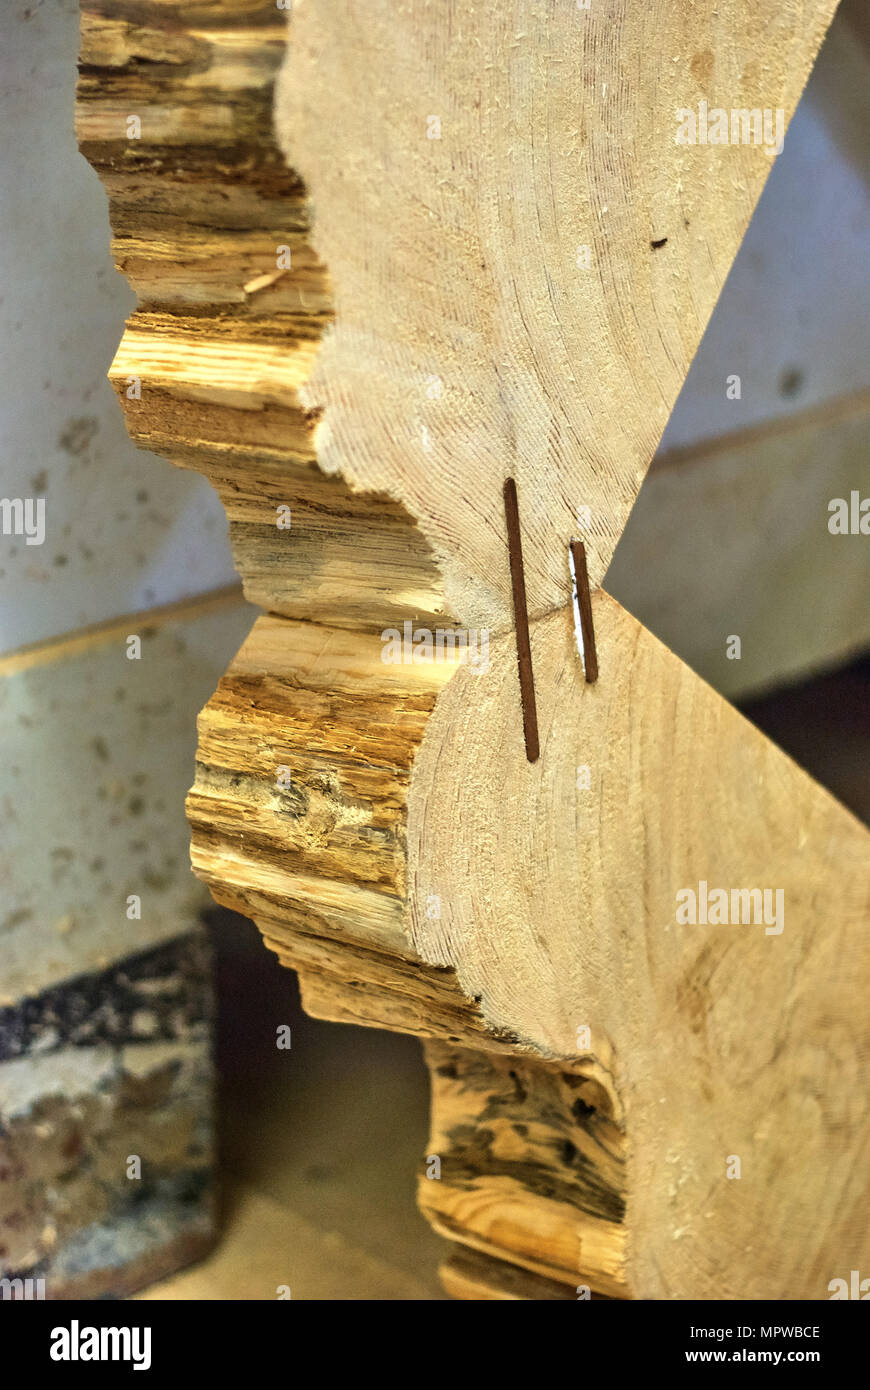 Dowel joinery. Gluing and inserting dowels into a wooden frame. Close-up Stock Photo